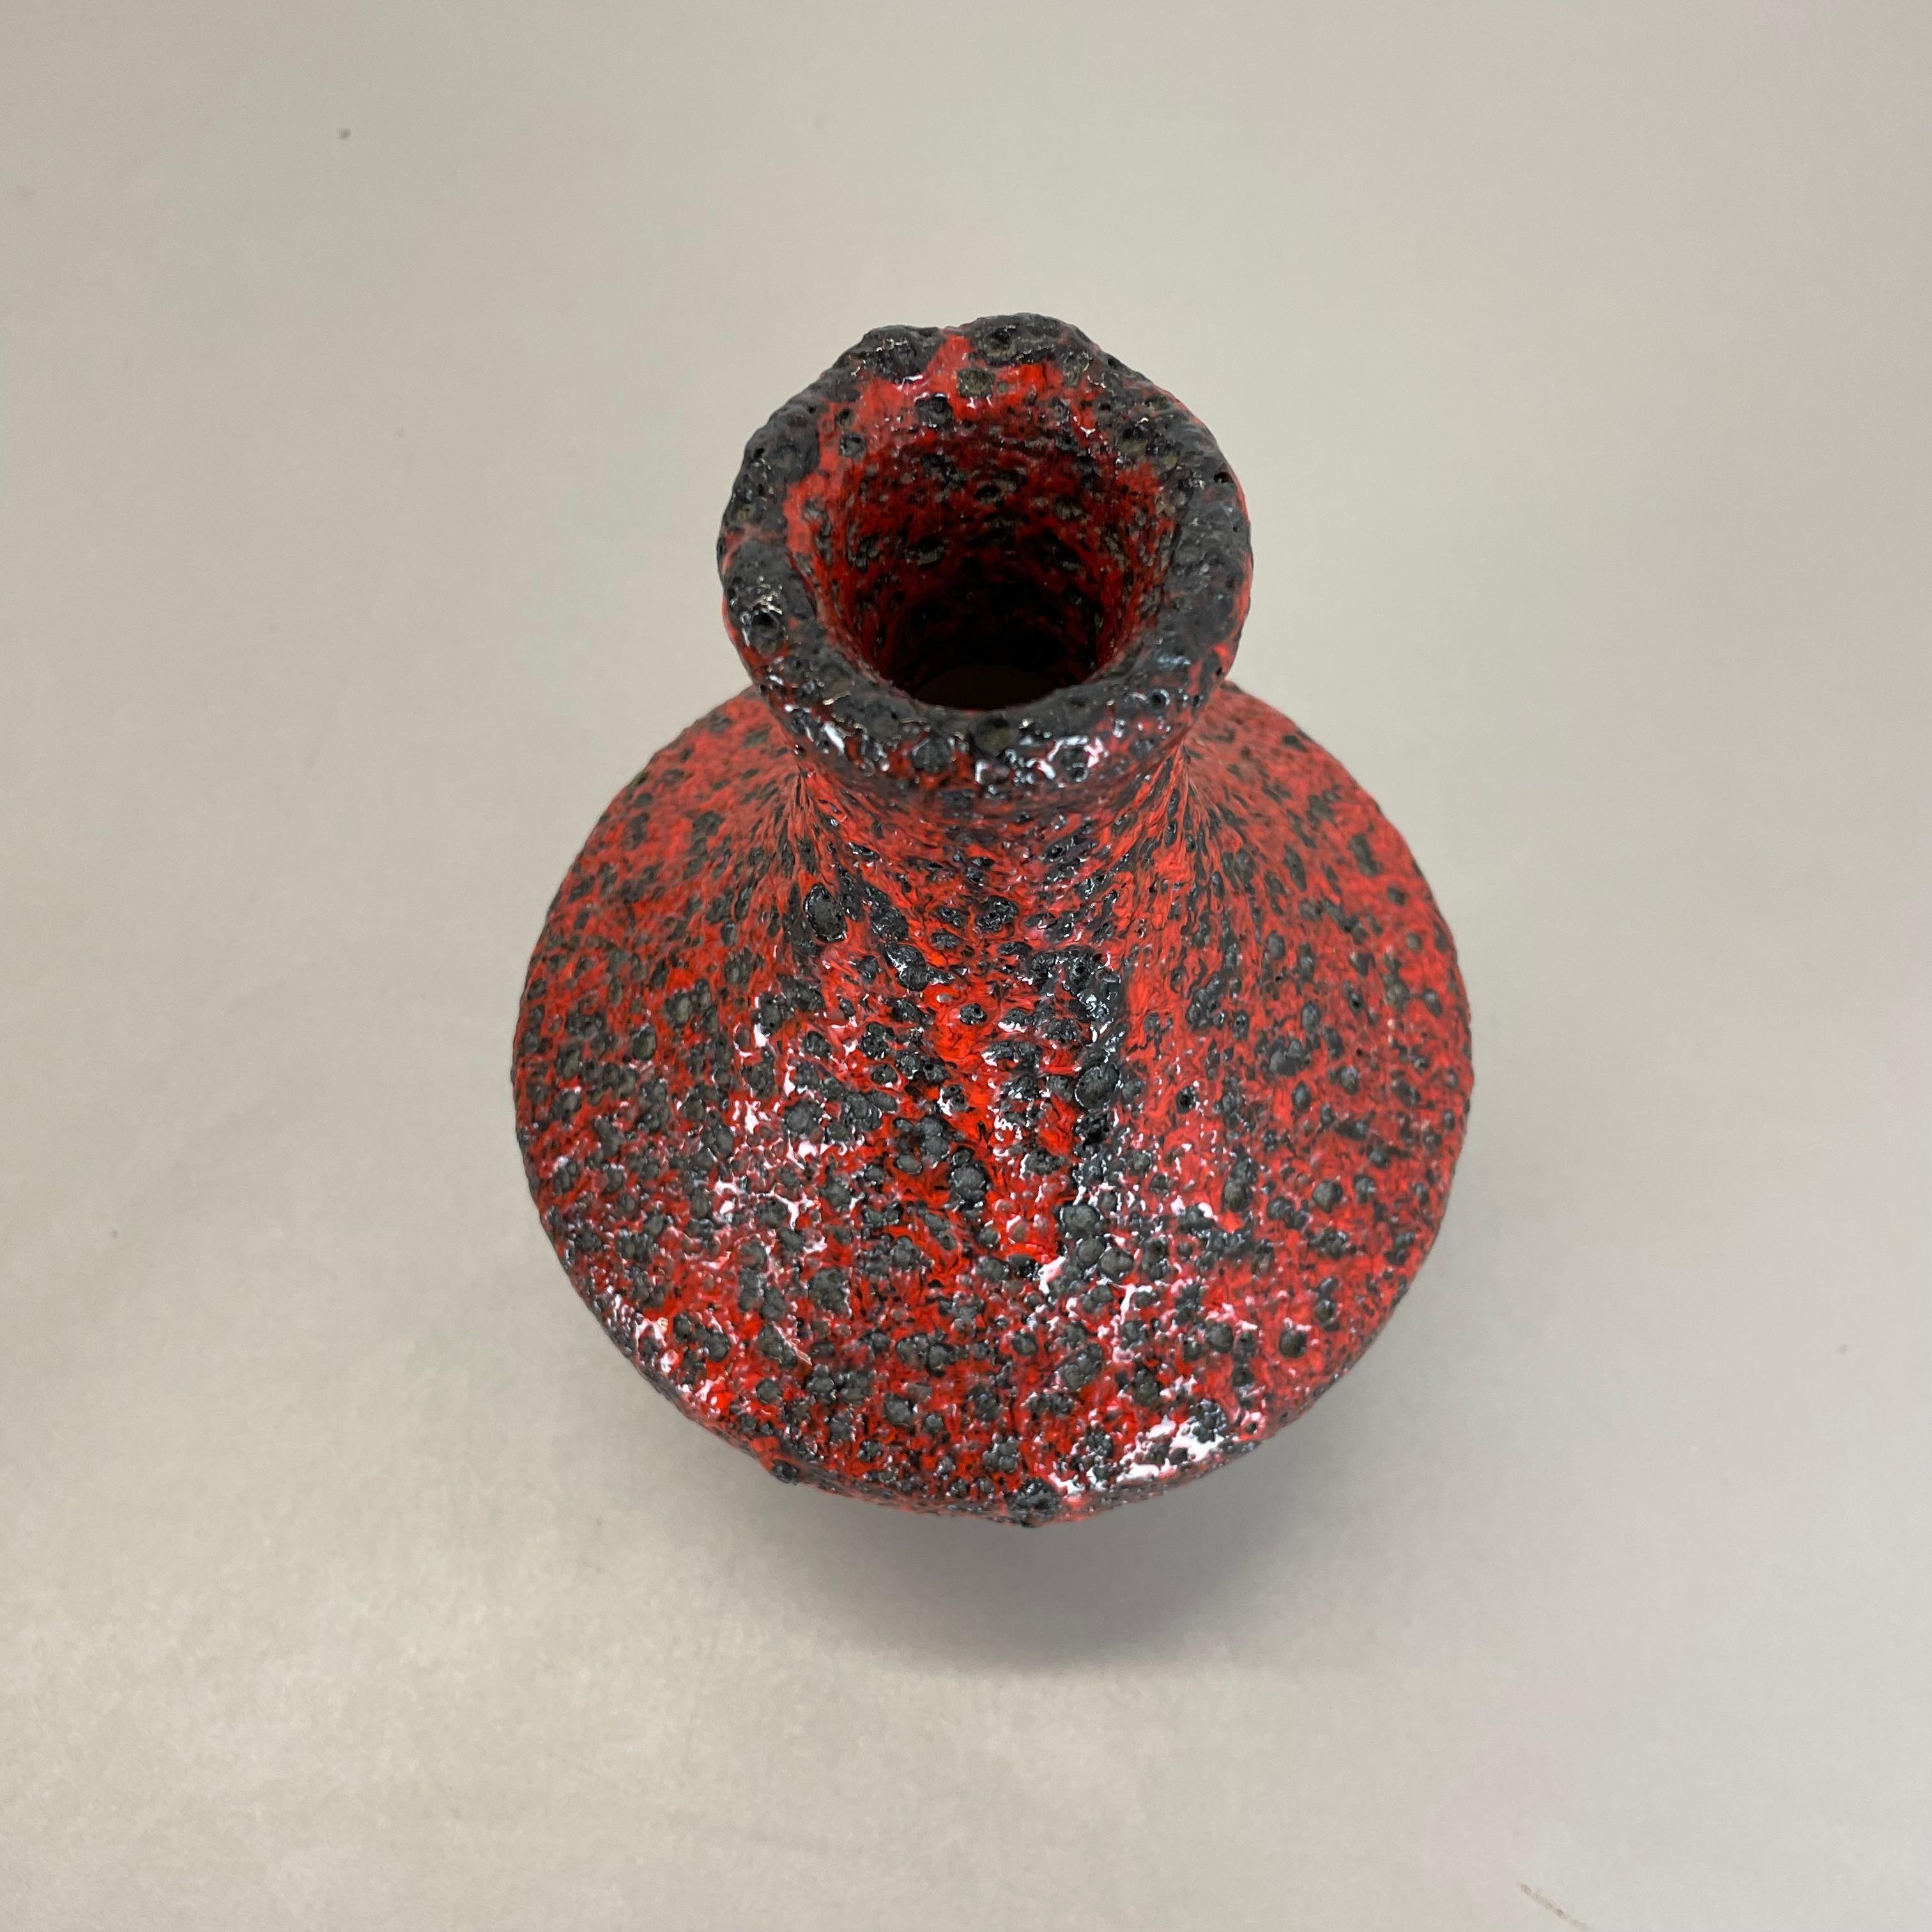 Brutalist Colorful Pottery red-black Vase Made by Silberdistel, W. Germany, 1970 For Sale 1